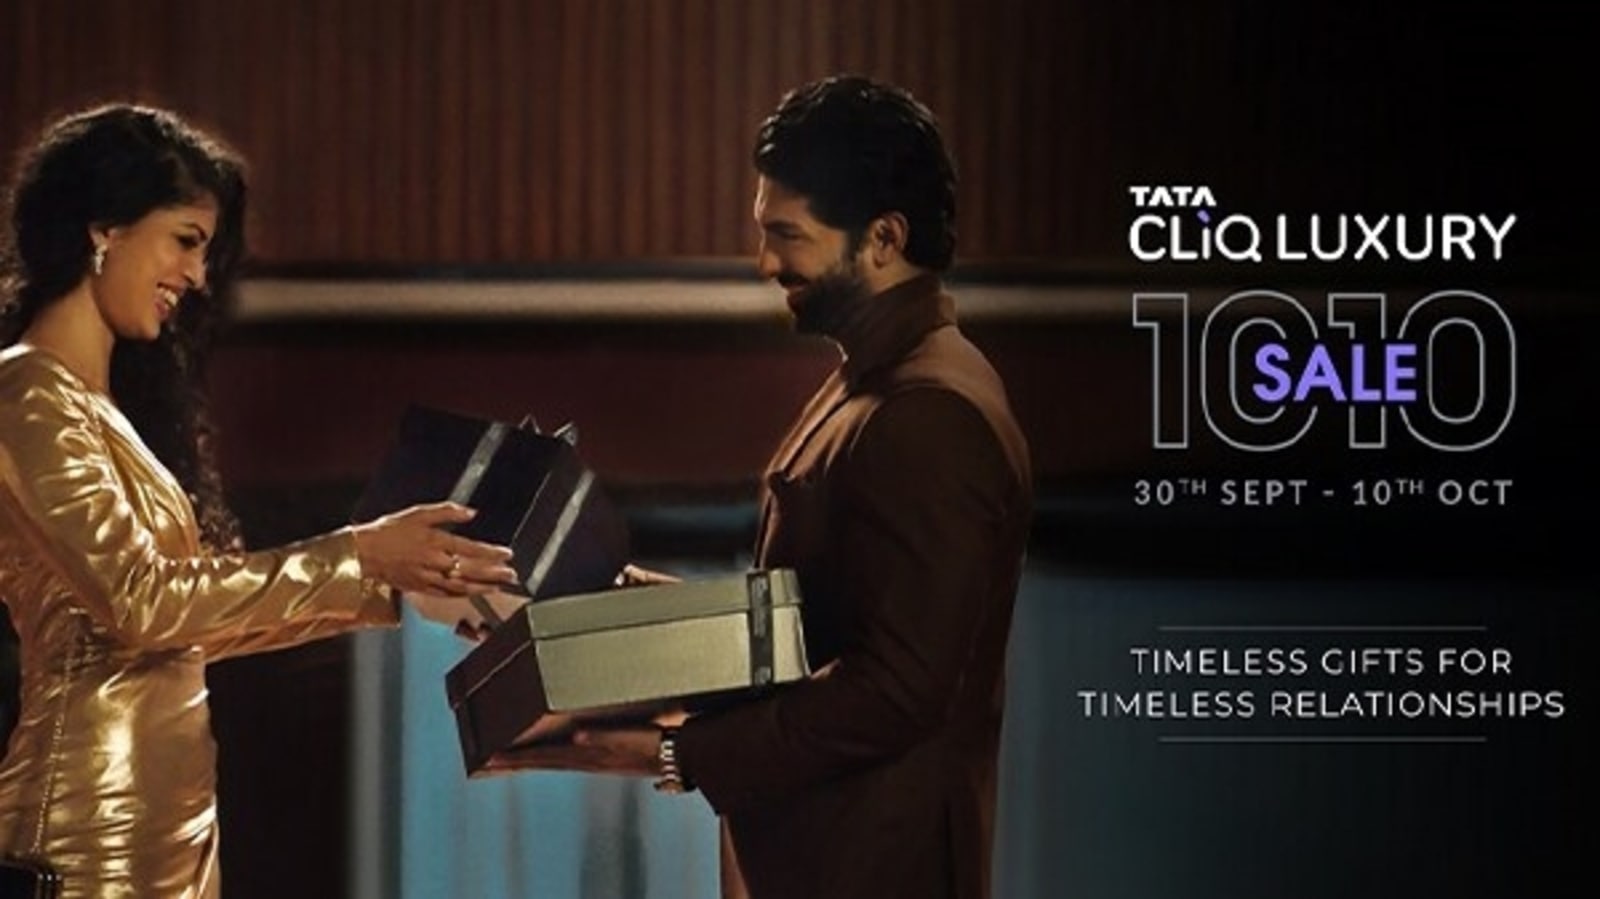 Tata CLiQ Luxury partners with multimedia artists to bring 'Time